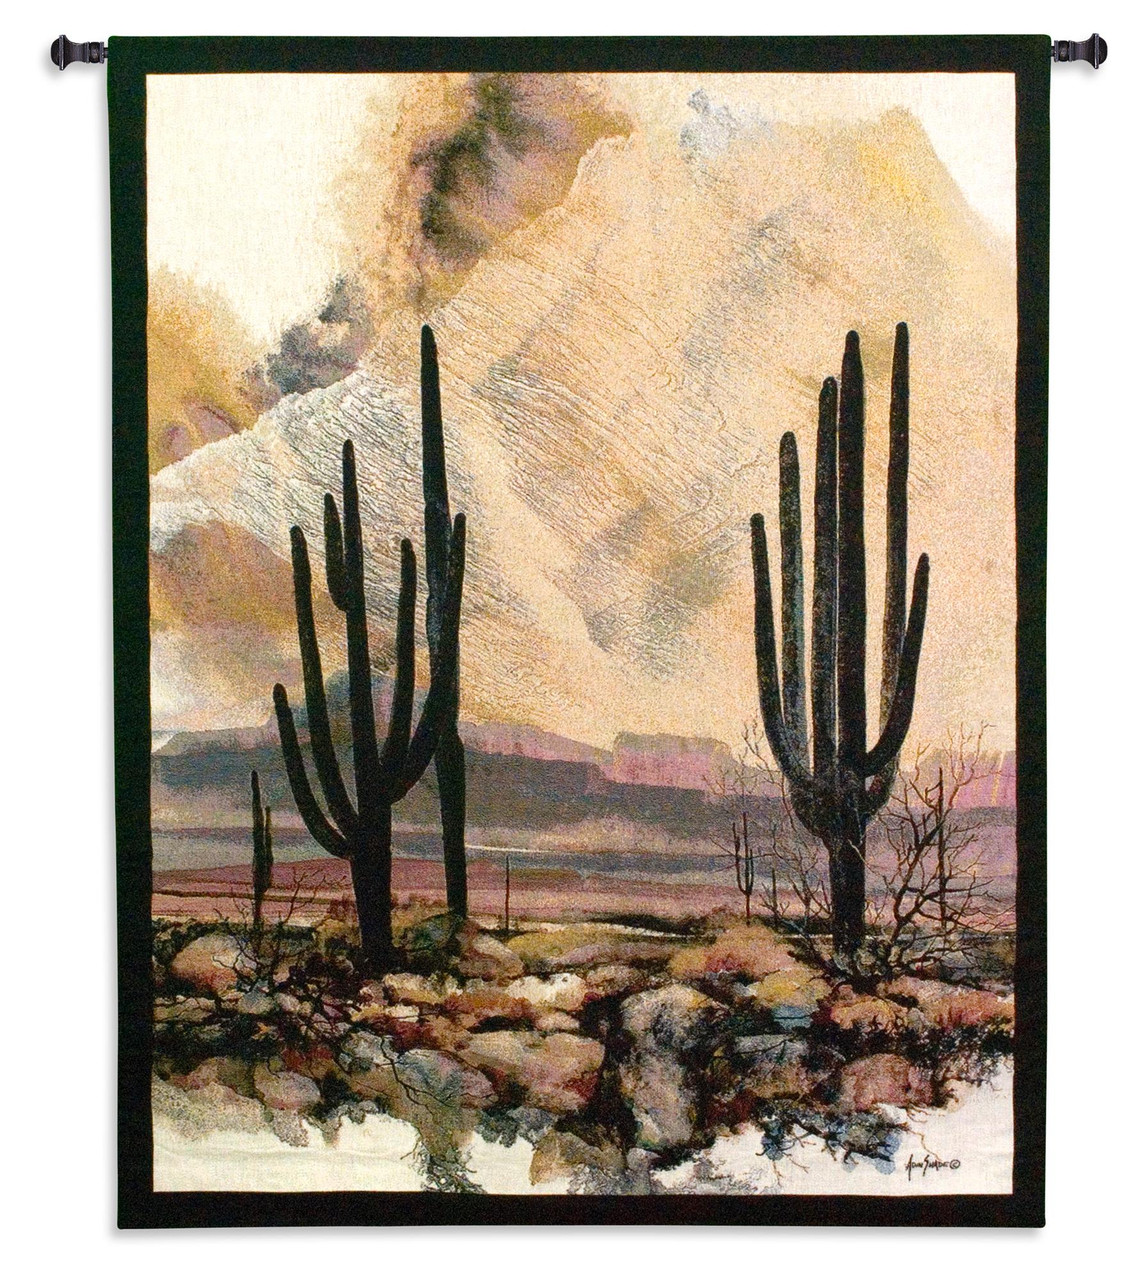 Sonoran Sentinels by Adin Shade Woven Tapestry Wall Art Hanging  Southwestern Desert Cactus with Sunset 100% Cotton USA Size 53x40